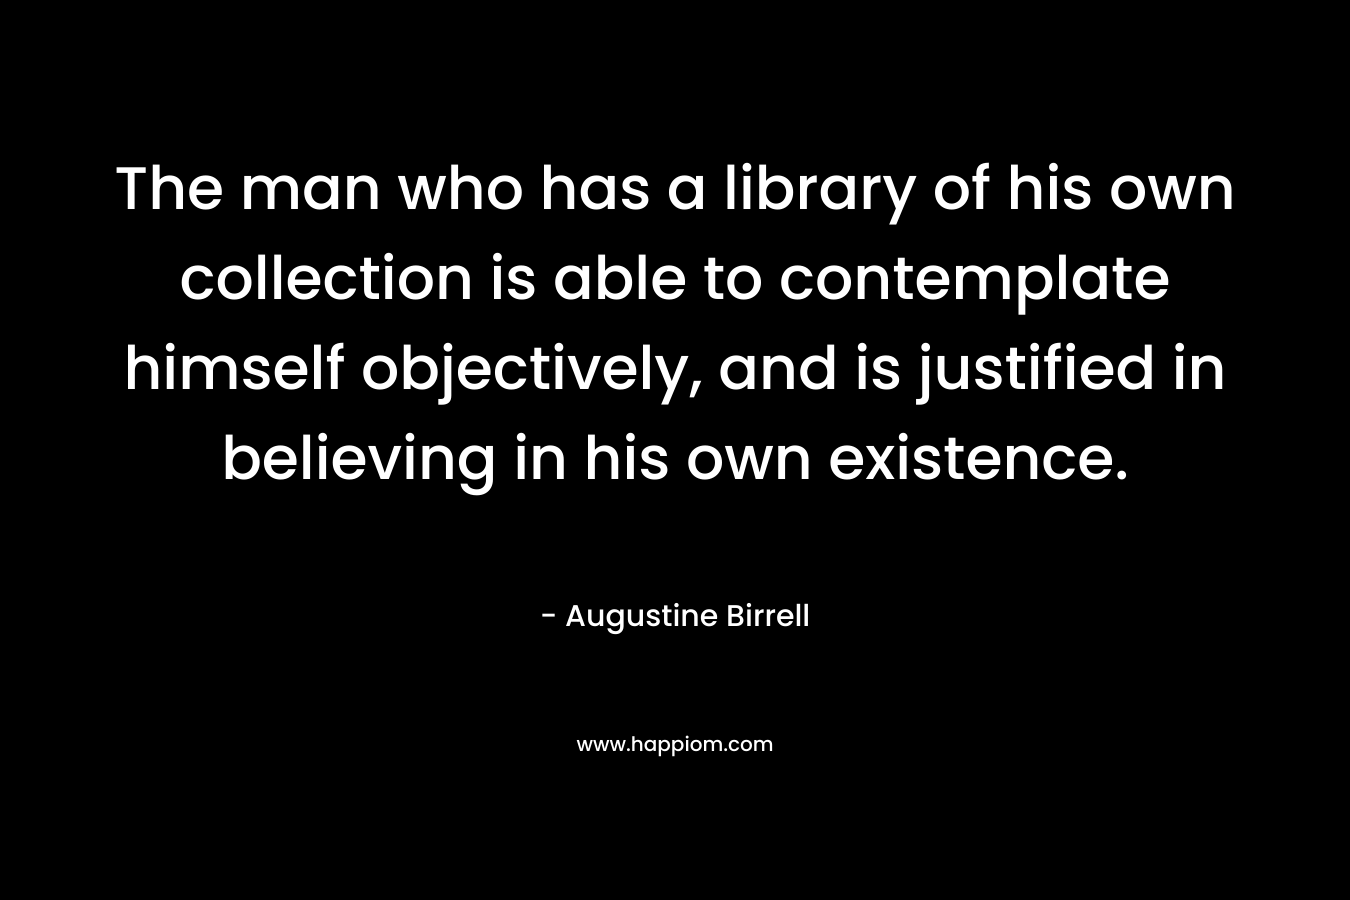 The man who has a library of his own collection is able to contemplate himself objectively, and is justified in believing in his own existence.